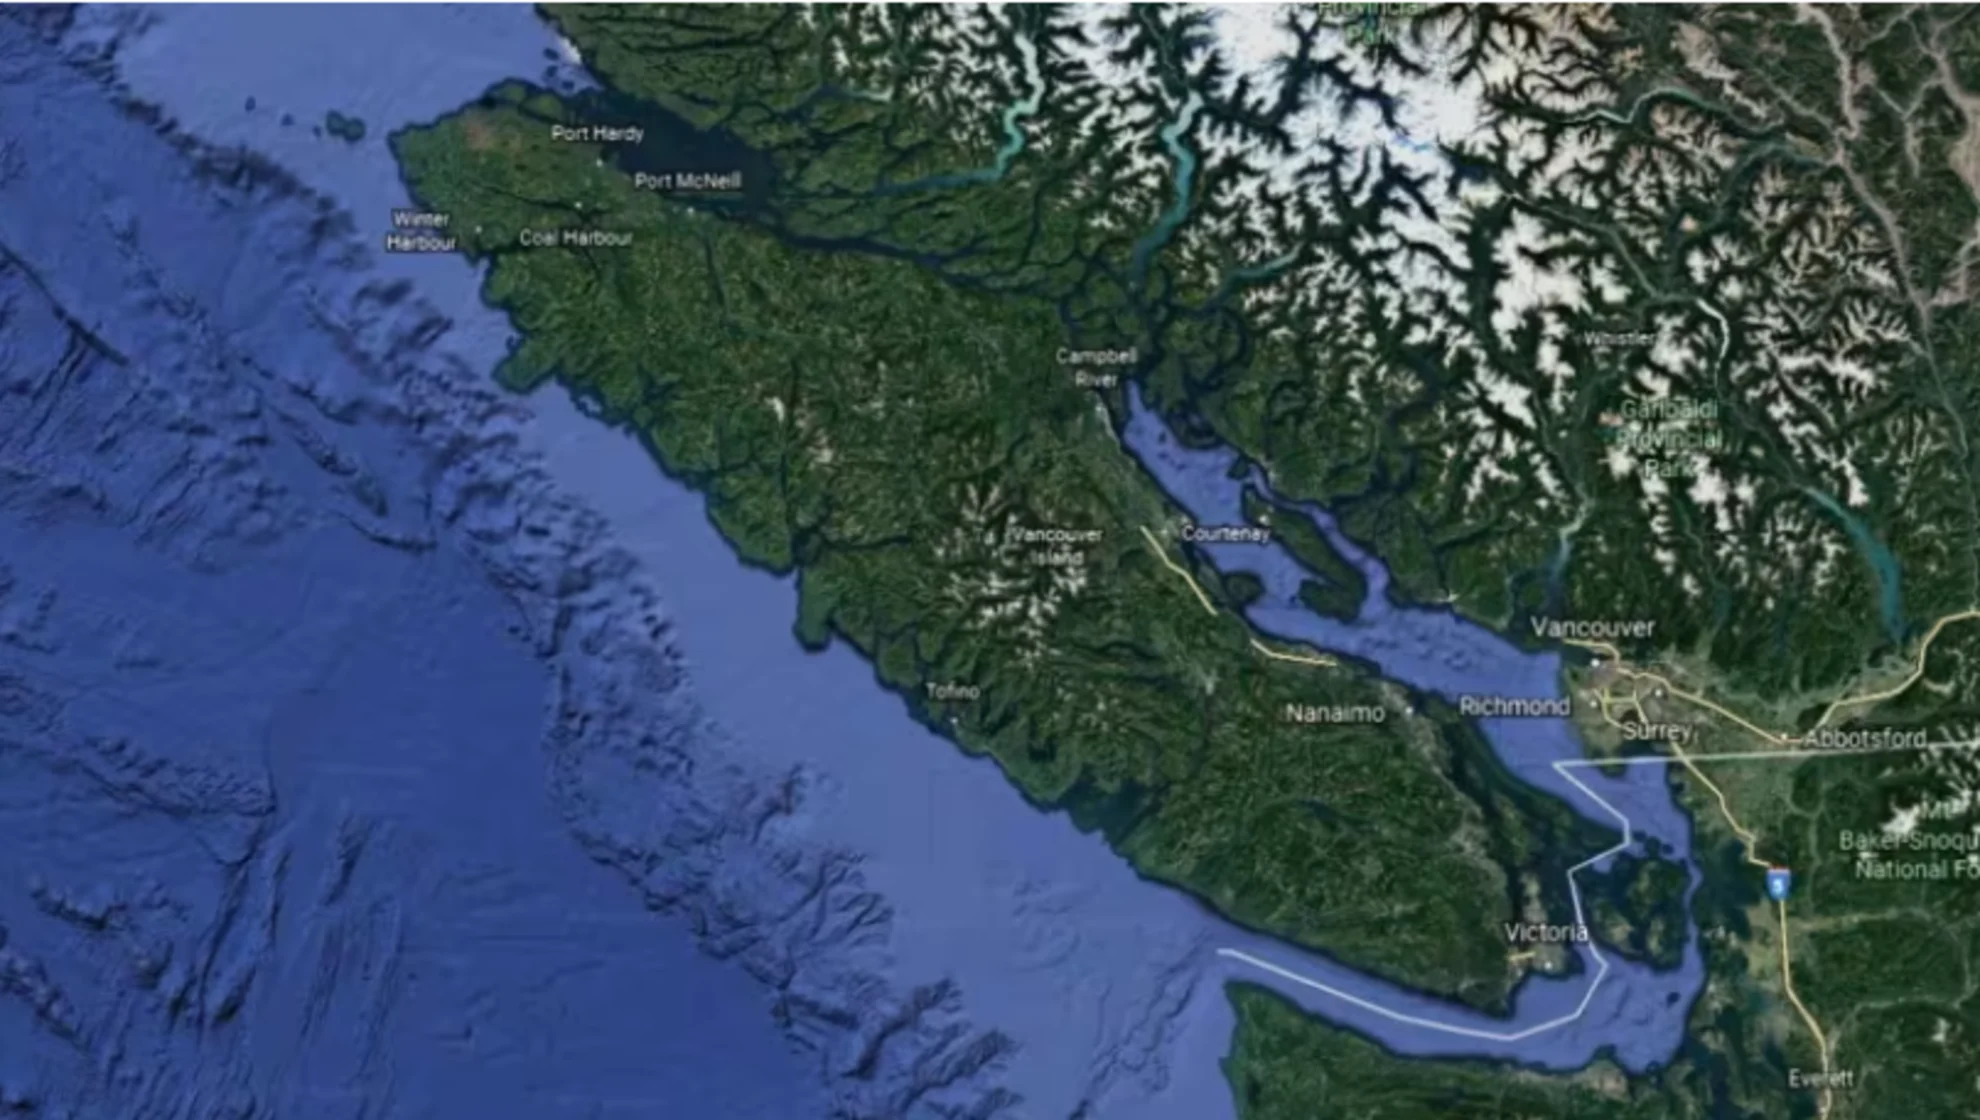 New research highlights where 'The Big One' earthquake could hit near Vancouver Island